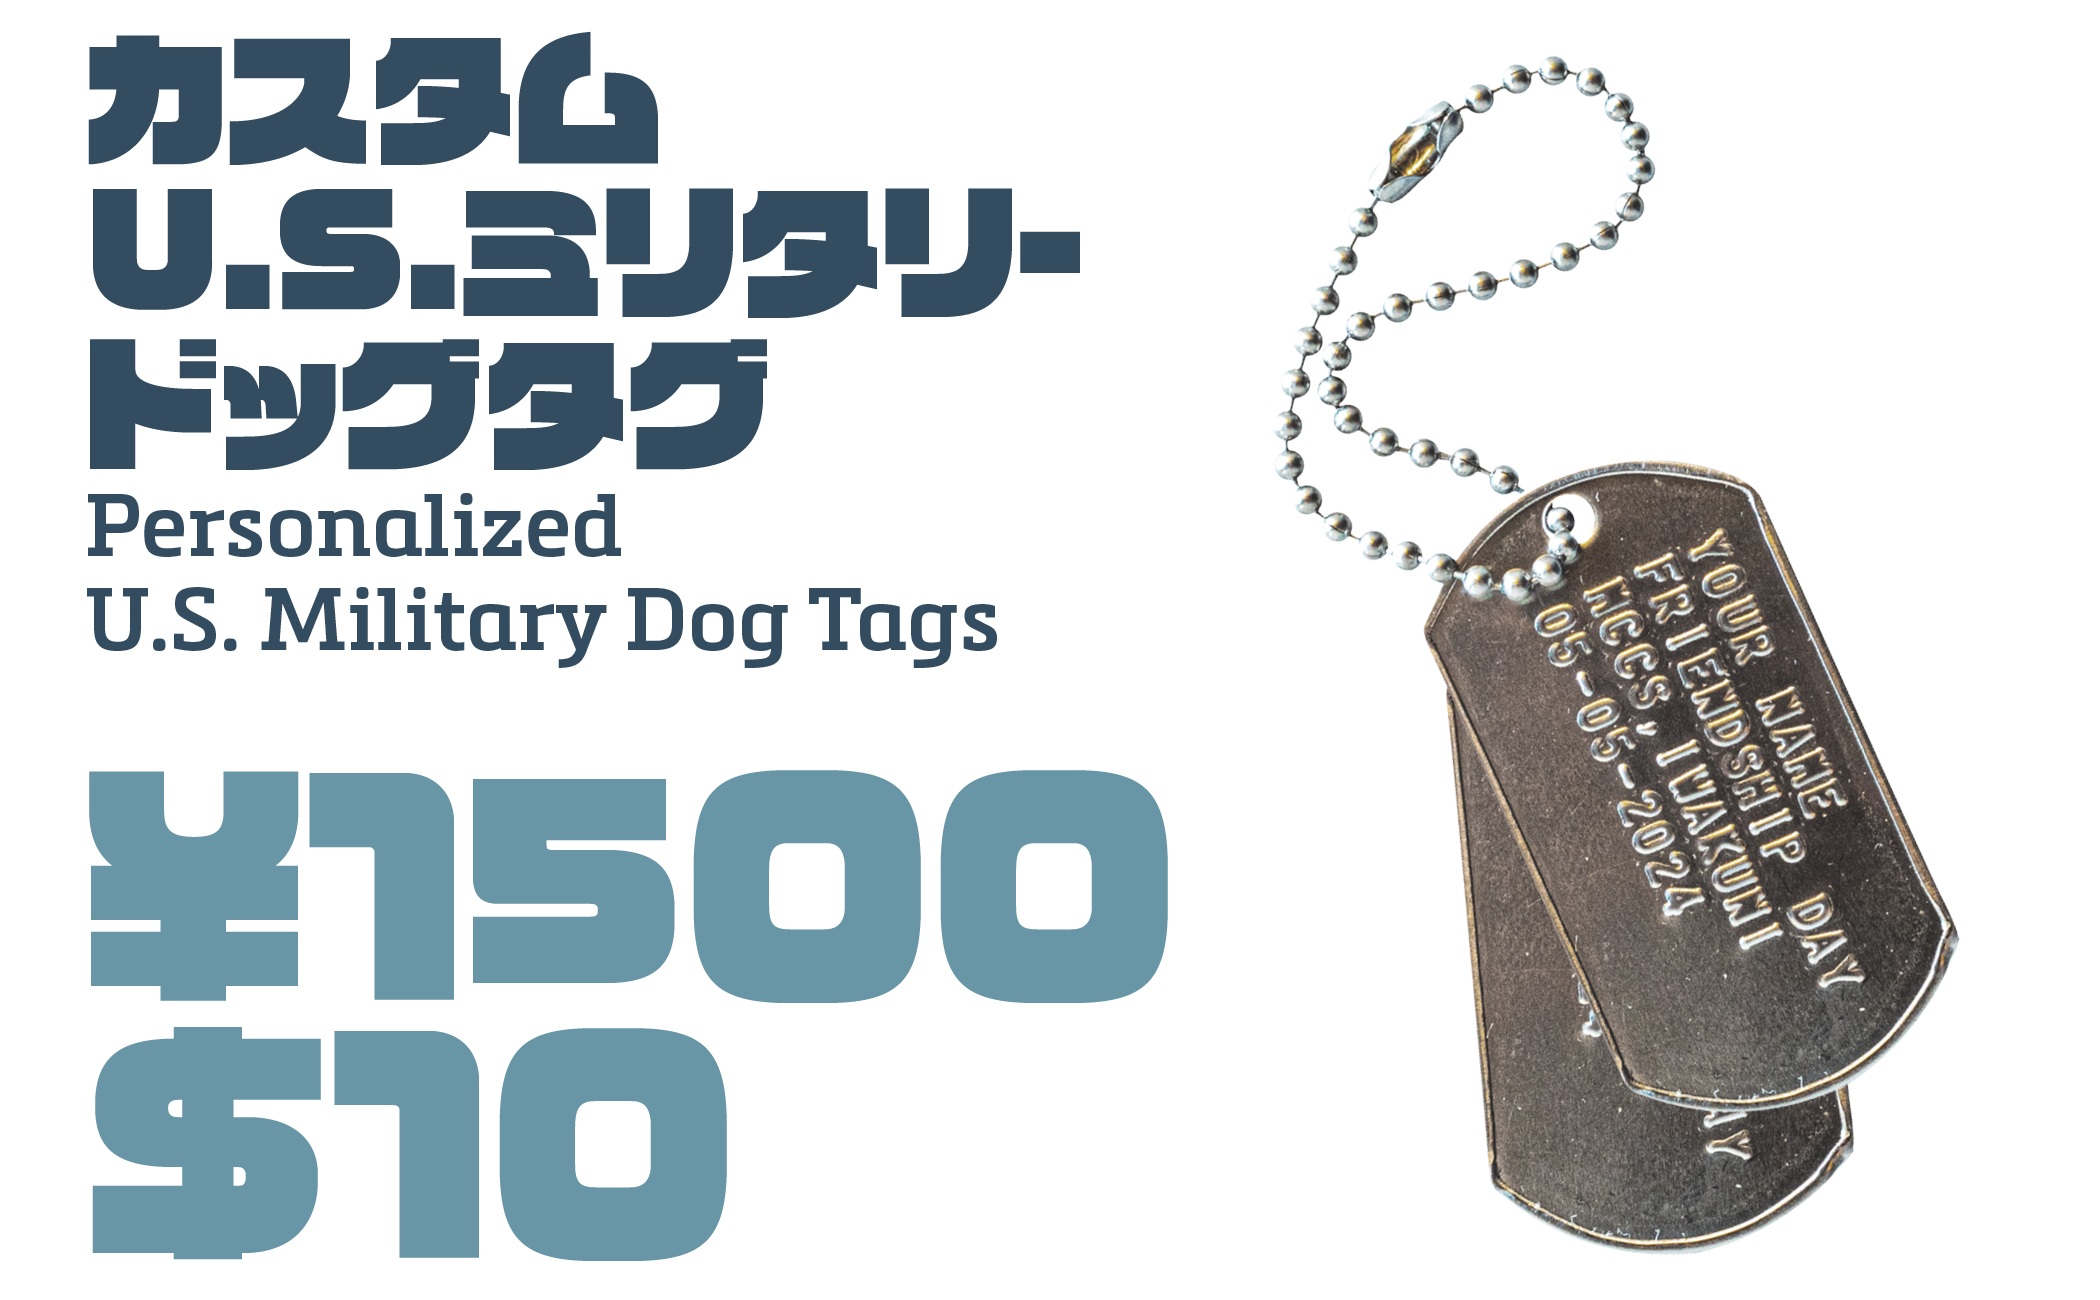 Personalized U.S. Military Dog Tags for $10 |　カスタムU.S.ミリタリードッグタグー ¥1500